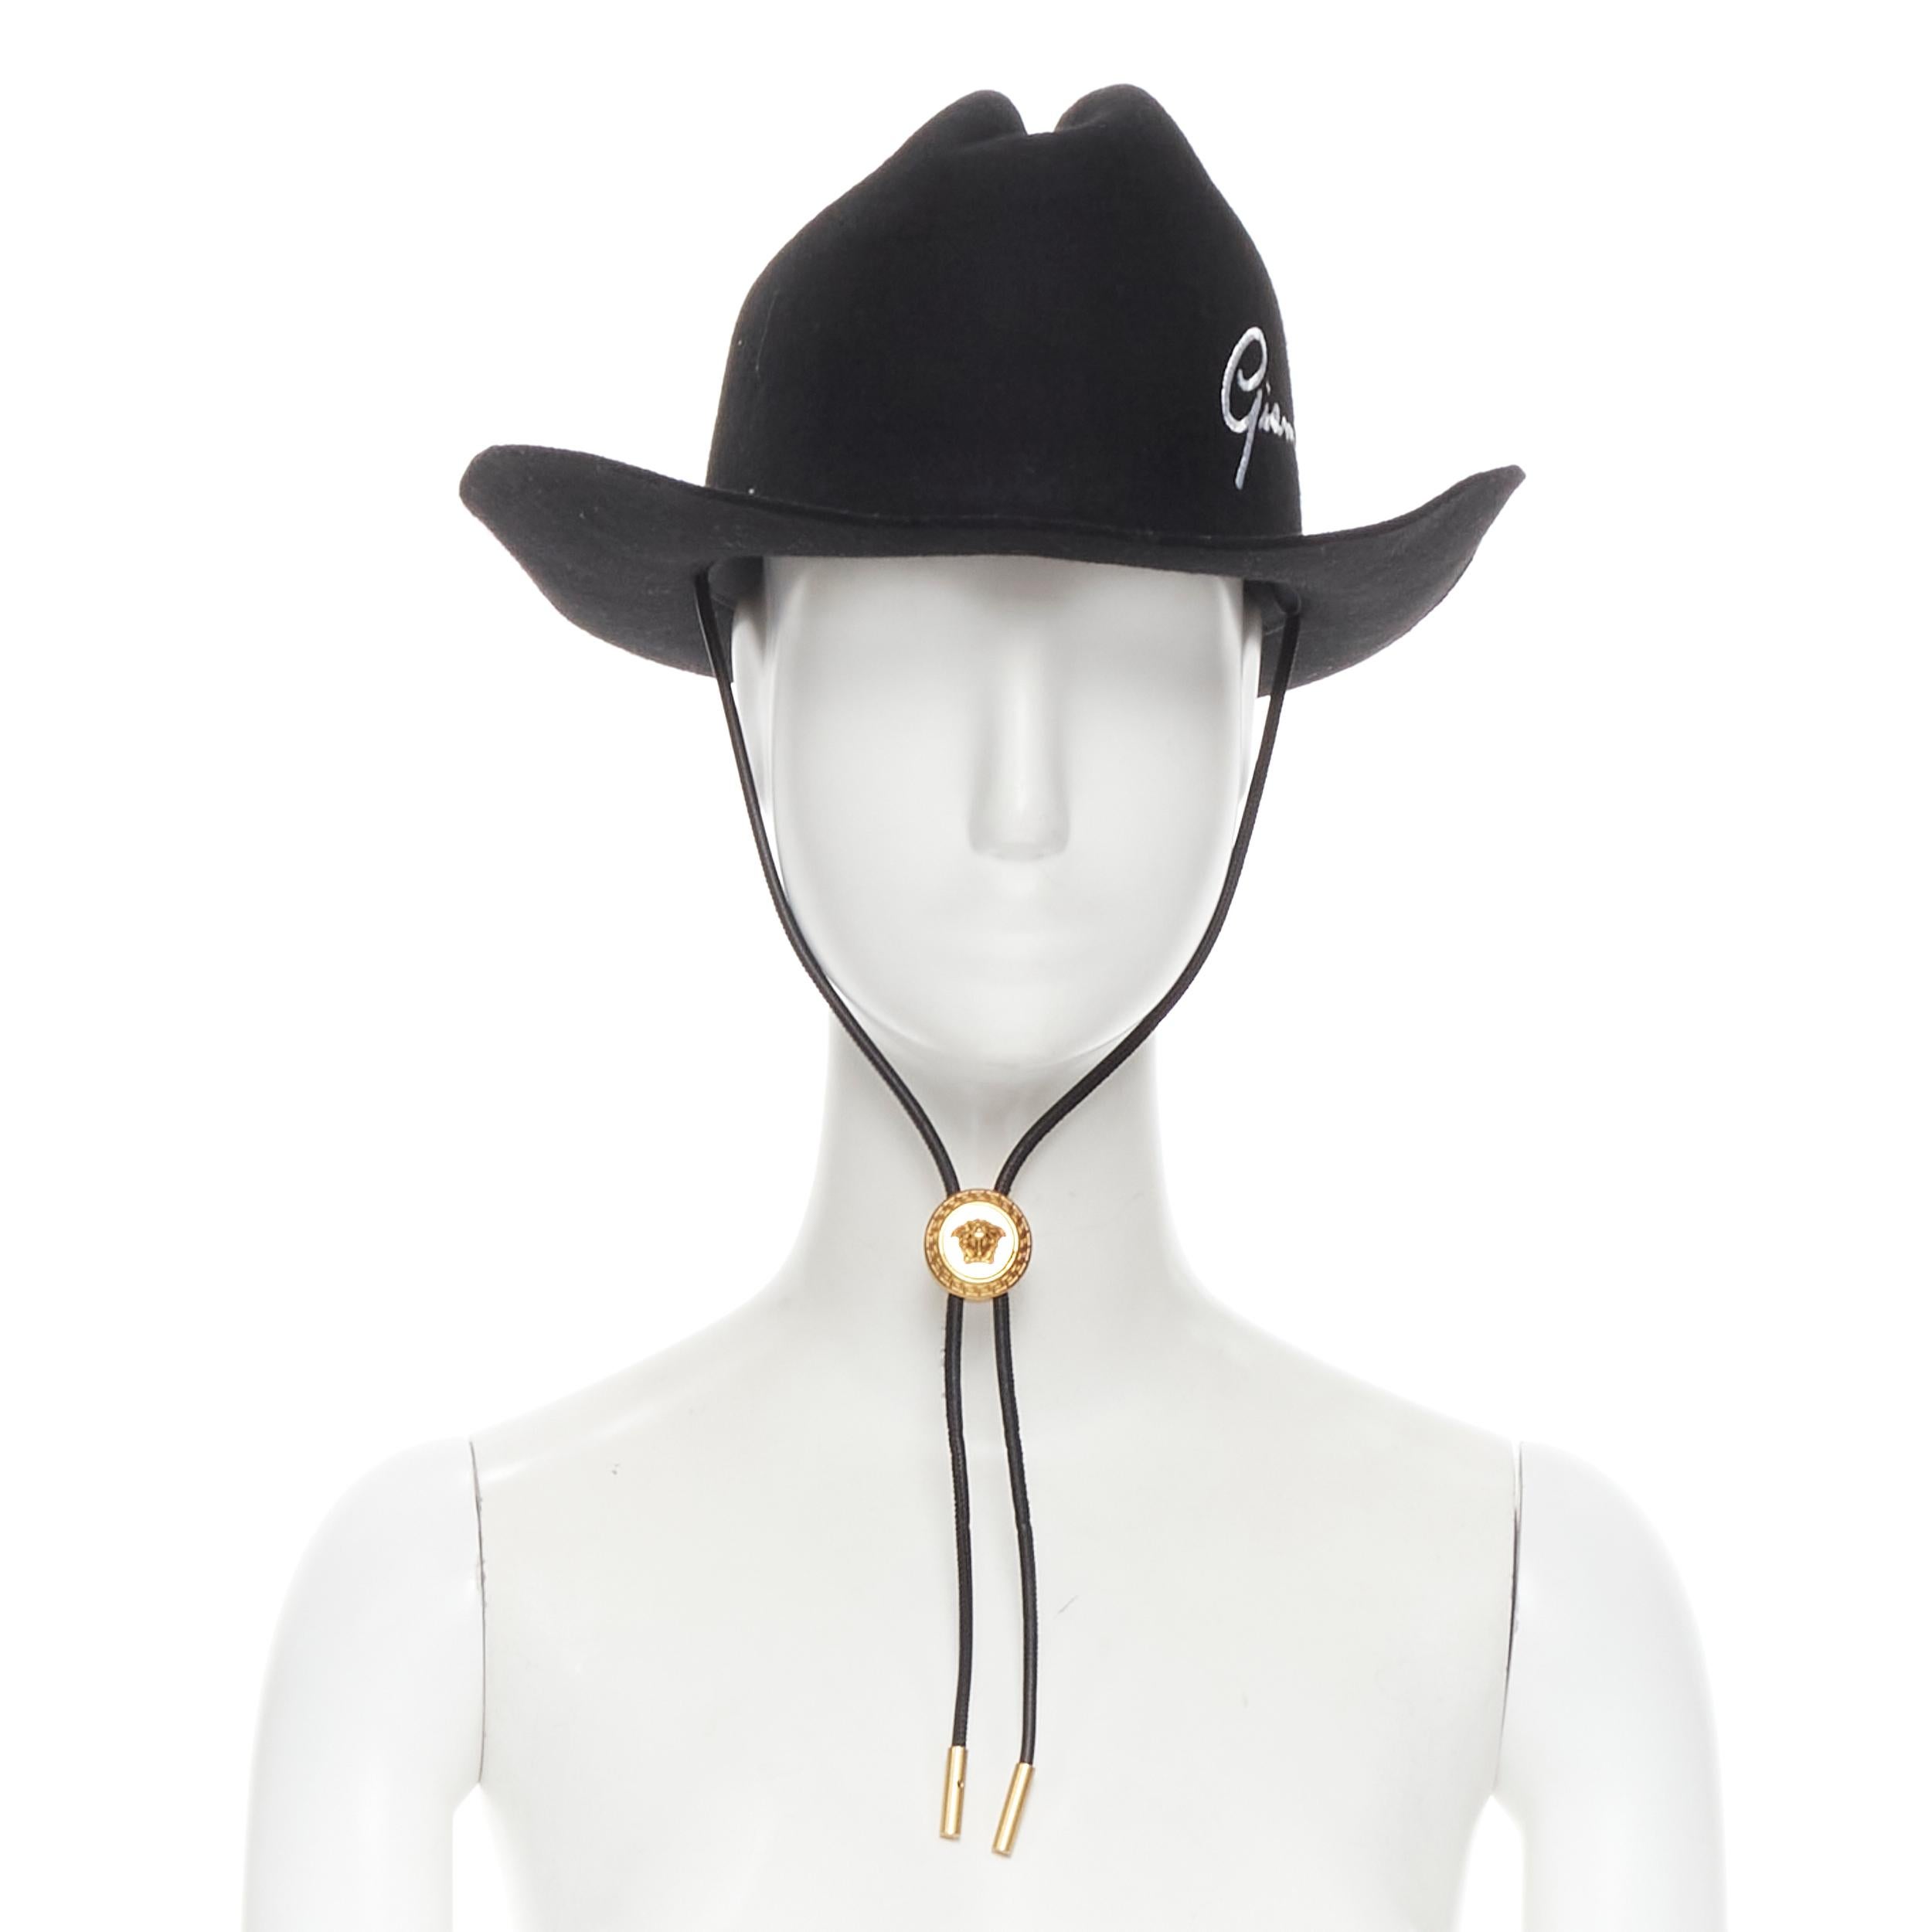 new VERSACE 2020 Runway Gianni GV Signature black wool Medusa cowboy hat EU57 
Reference: TGAS/B01501 
Brand: Versace 
Designer: Donatella Versace 
Collection: 2020 Runway 
Material: Wool 
Color: Black 
Pattern: Solid 
Extra Detail: Black hat with